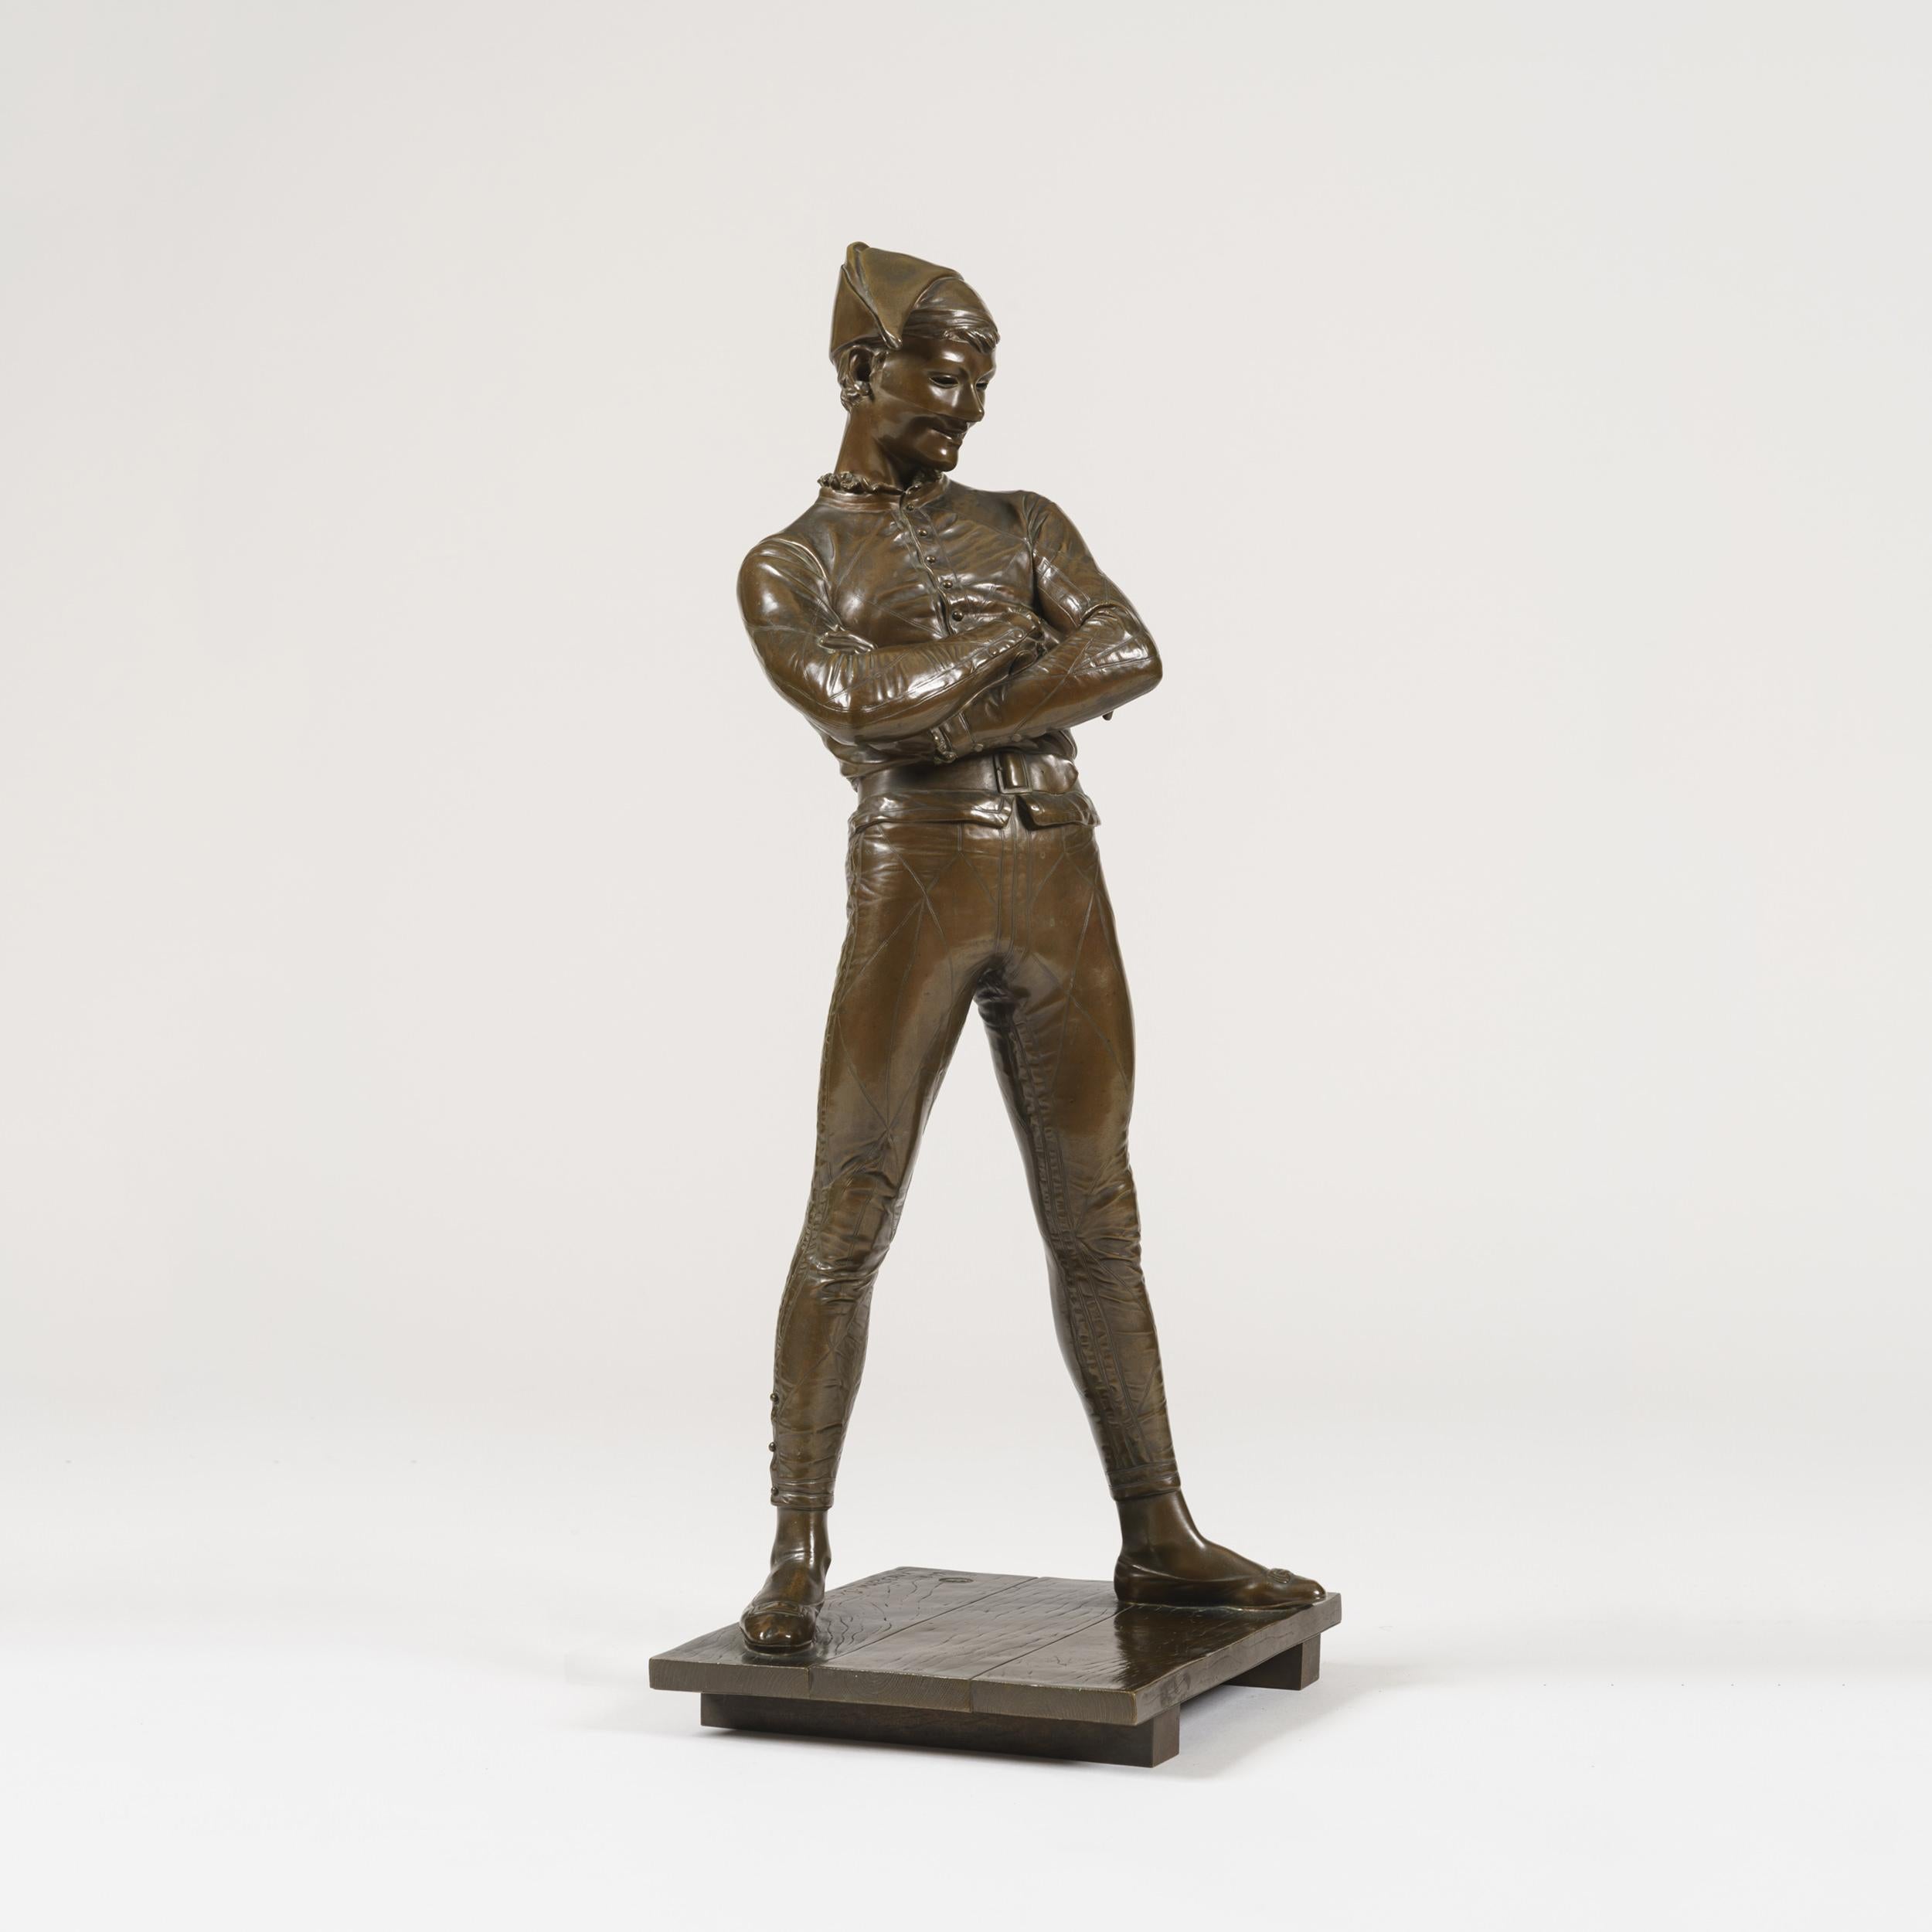 A bronze Statuette of Arlequin
by Charles-René de Paul de Saint-Marceaux

Cast by Barbedienne. The mischievous Harlequin, arms crossed in contemplation, wearing a grin and a mask, treading the boards of the stage, as befits his leading place in the